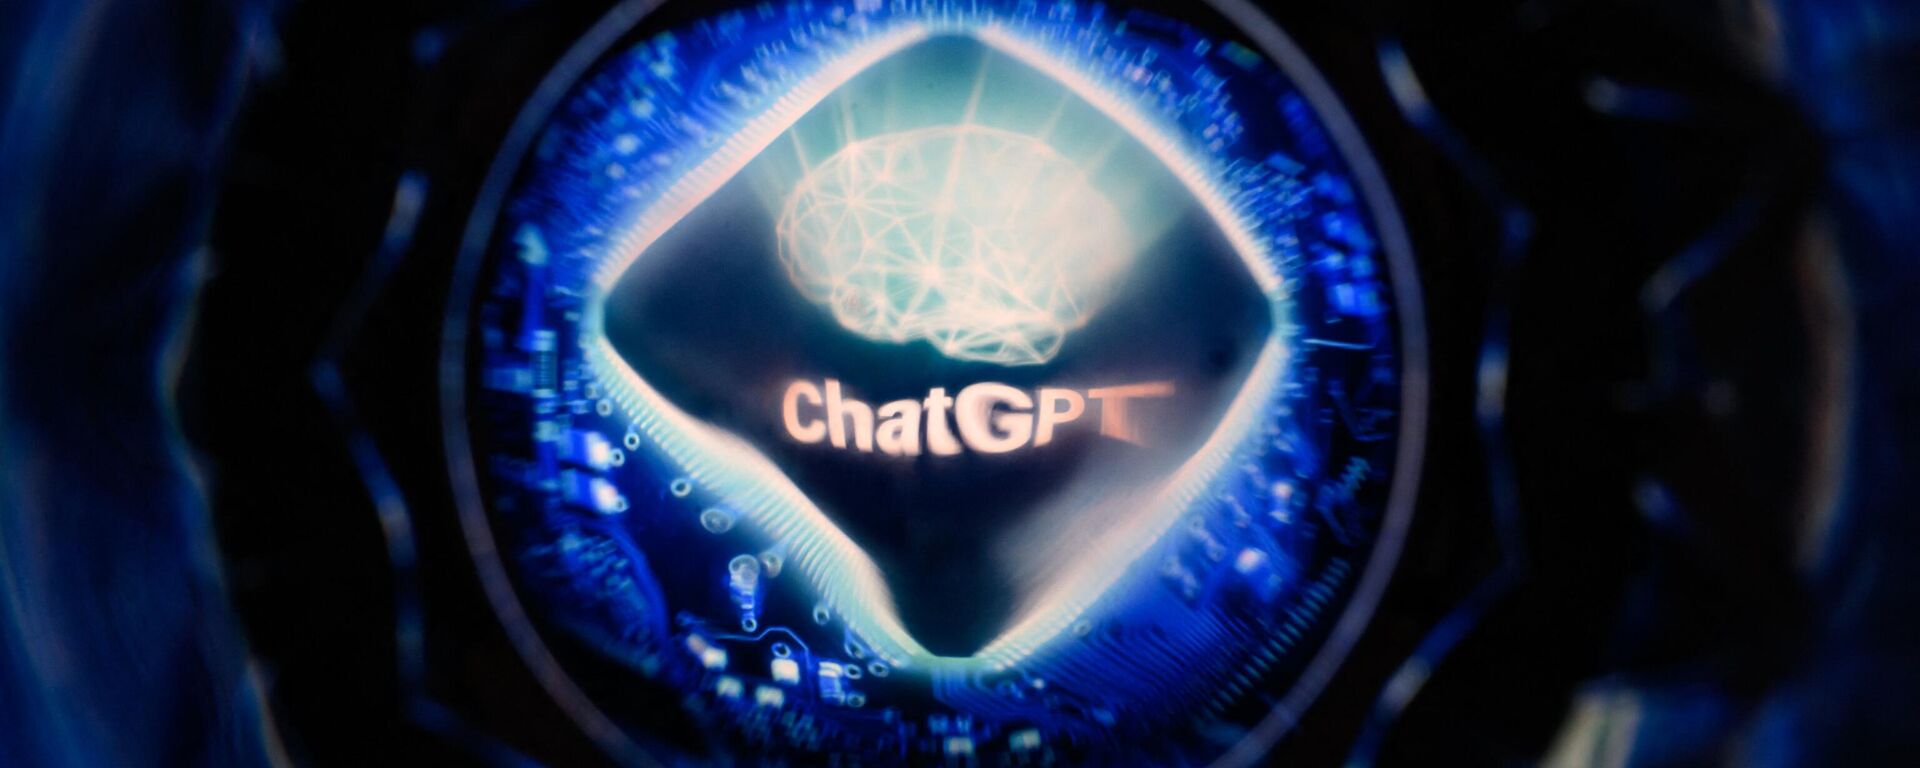 Screen displaying the logo of ChatGPT, the artificial intelligence software application developed by OpenAI. - Sputnik International, 1920, 11.07.2023